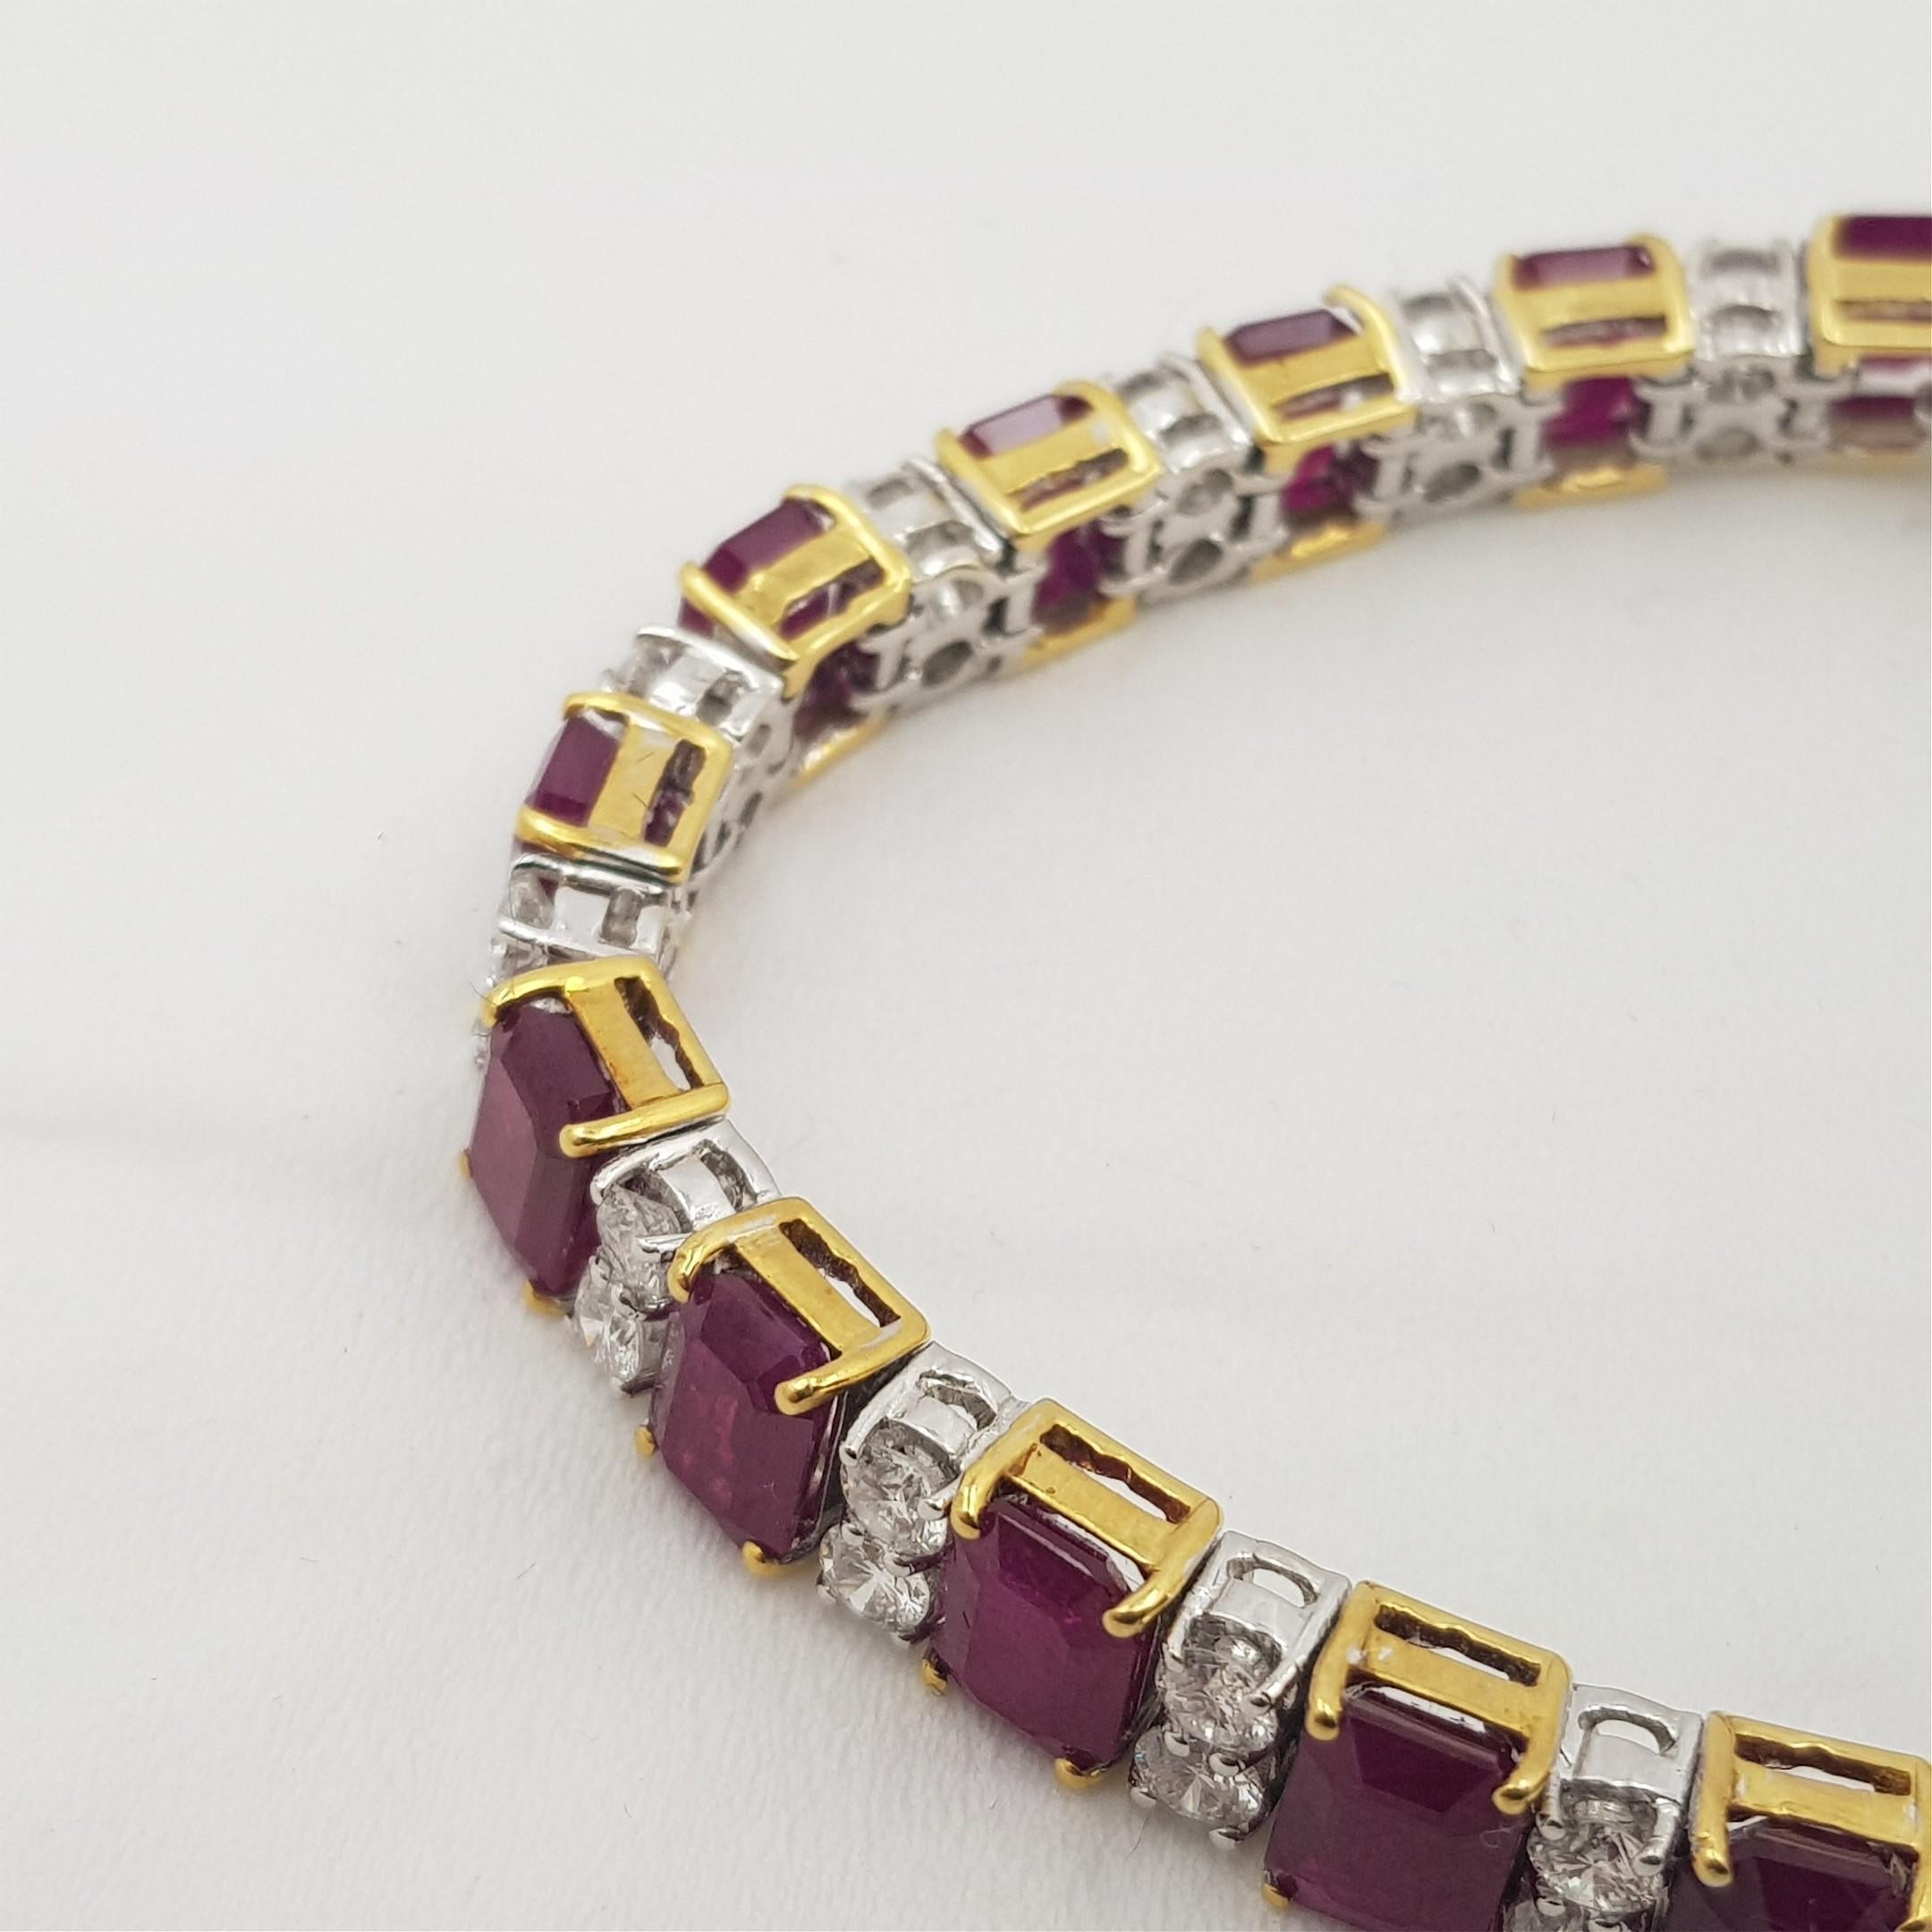 18ct Two Tone Gold Burmese Ruby & 4.5ct TW Diamond Bracelet Val $62765 AUD For Sale 2